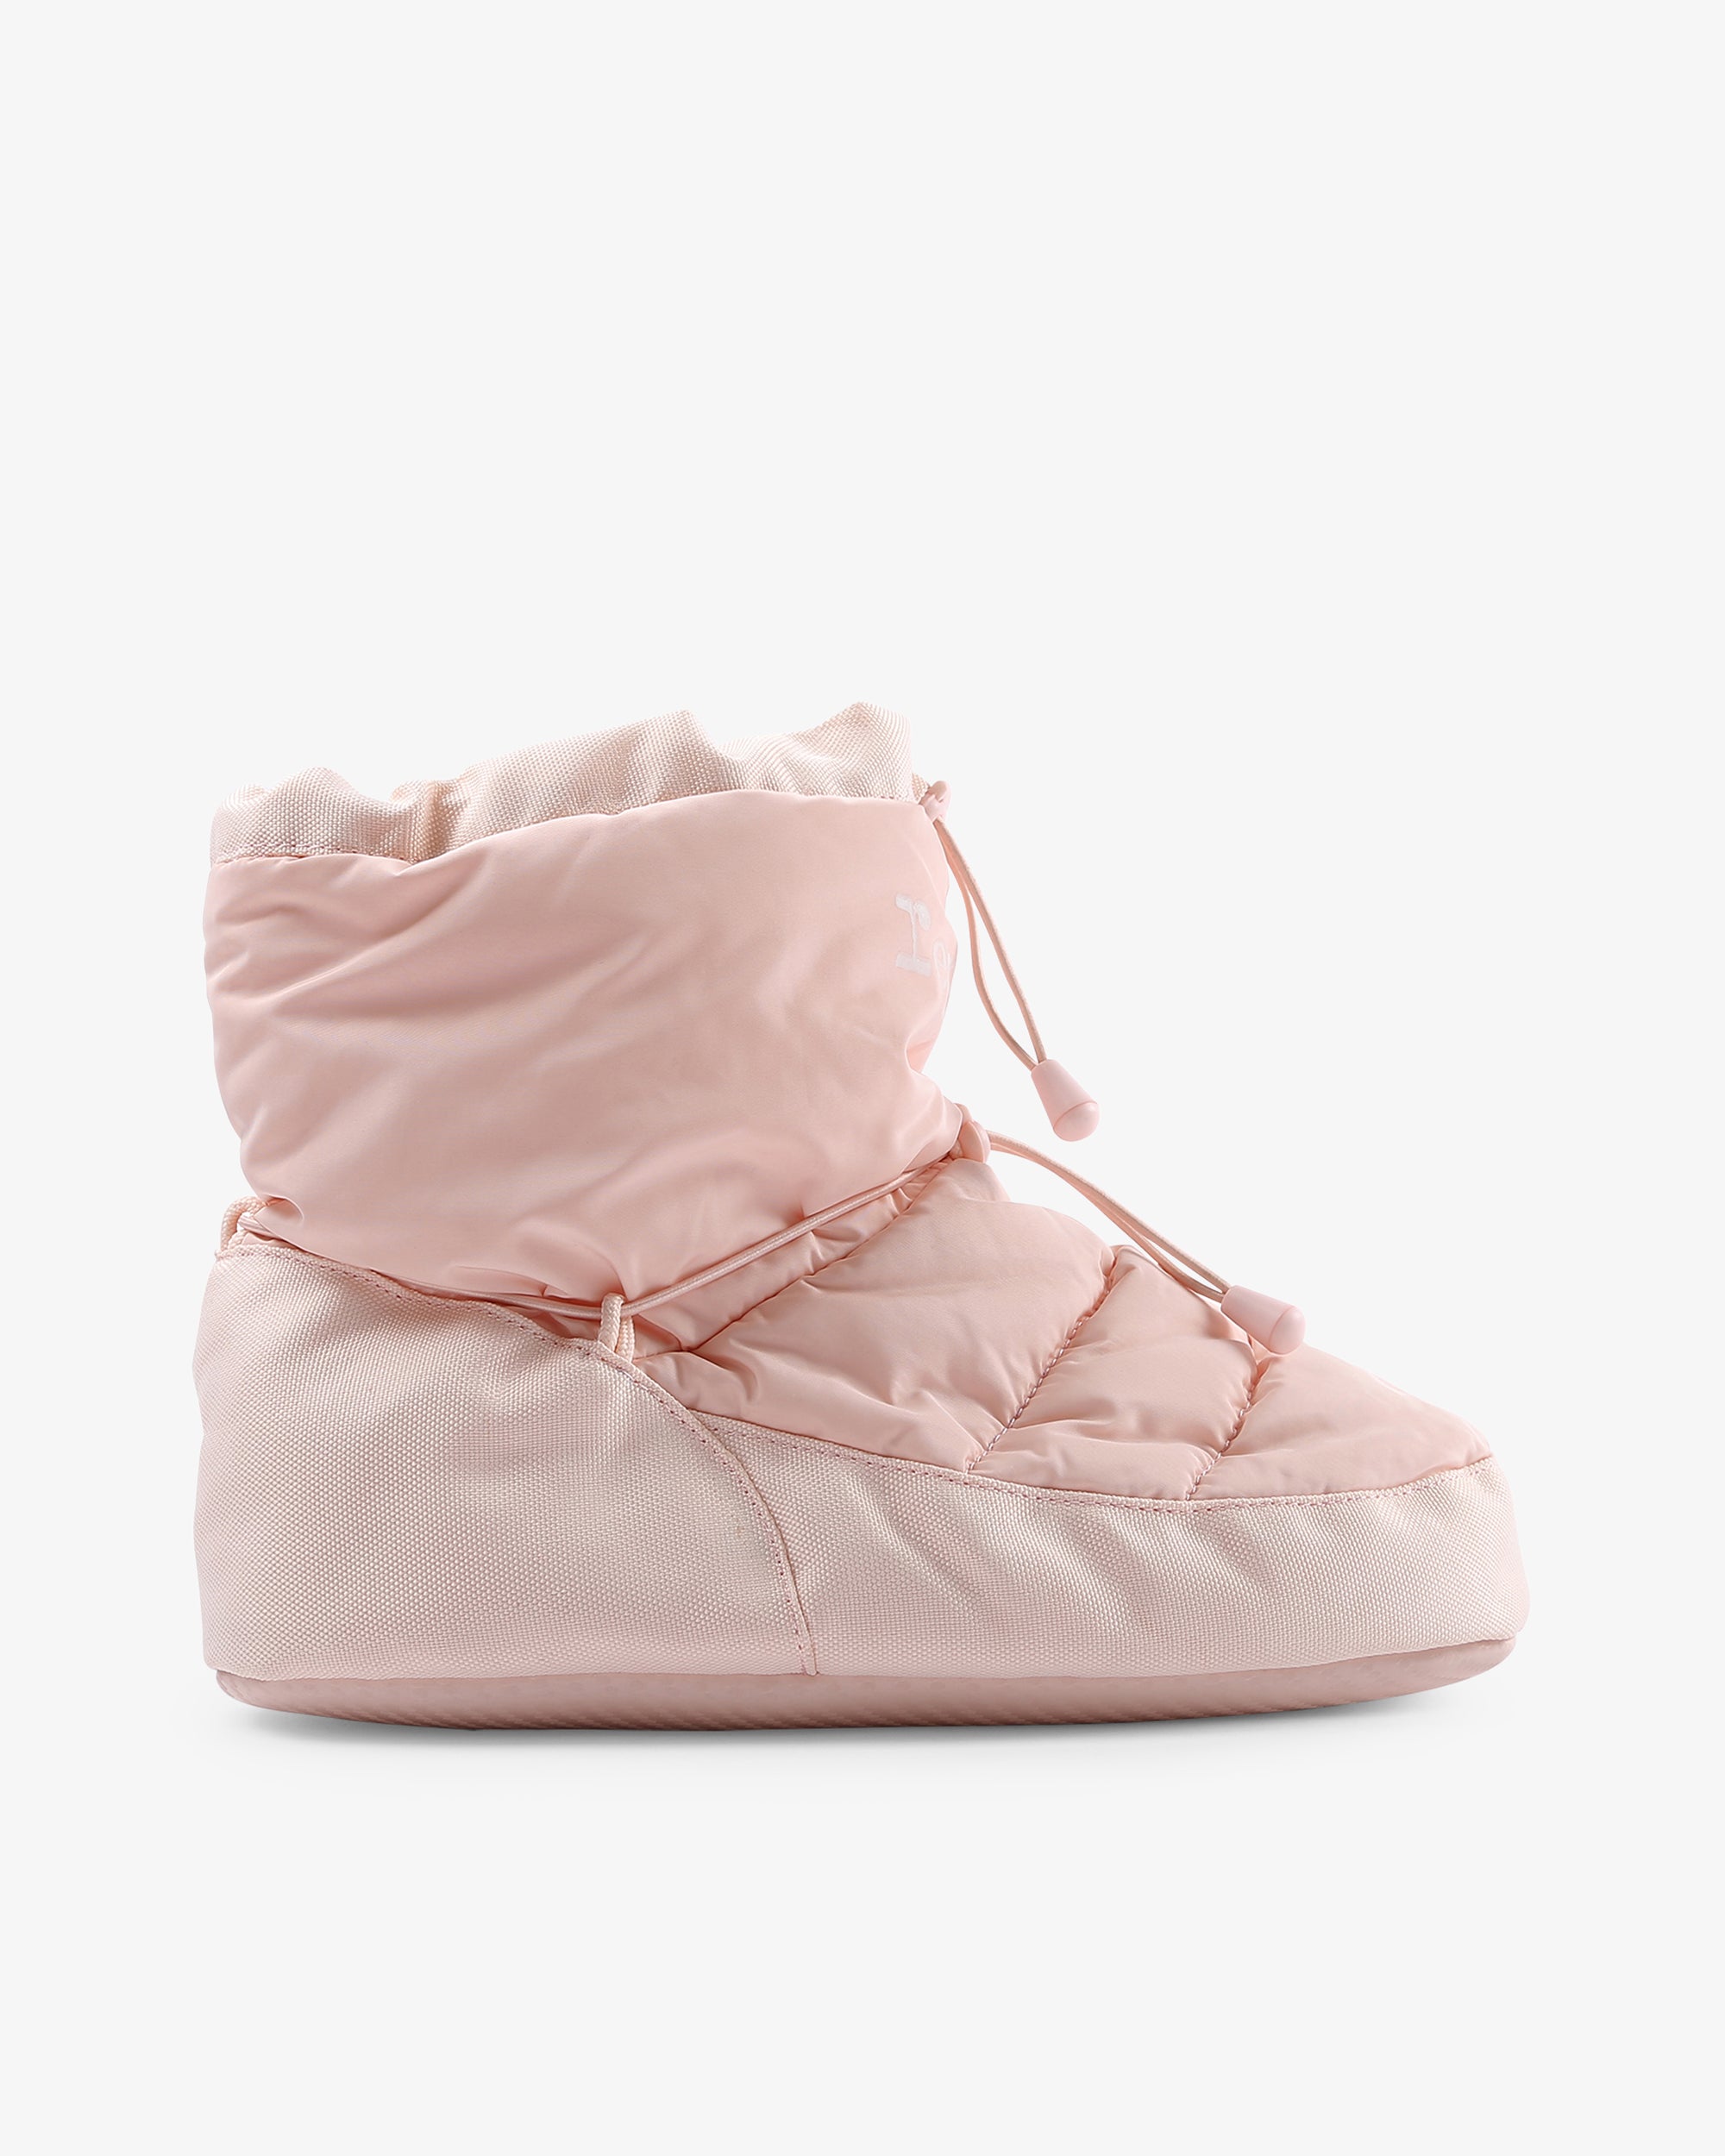 Sports and dance warm-up boots Petal pink – Repetto